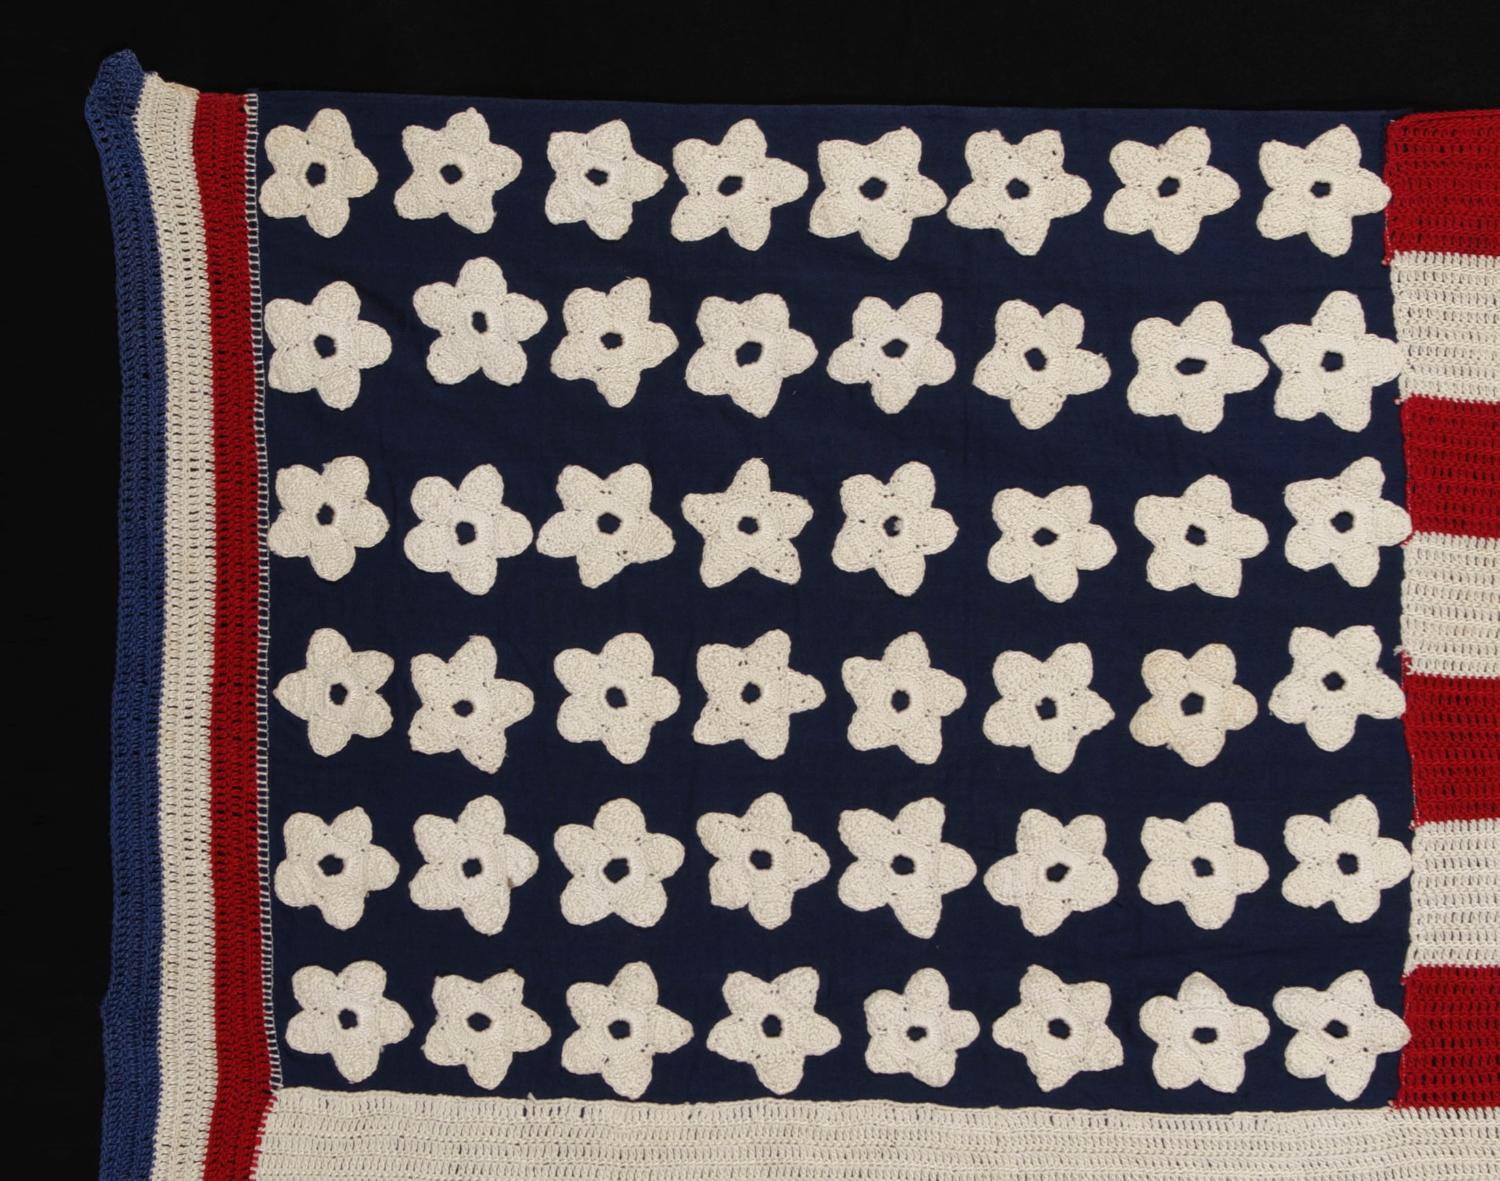 48 star, crocheted, antique american flag of the wwii era (1941-1945), a beautiful, homemade example, with a red, white, & blue hoist and flower-like stars:

Crocheted American flag of the WWII era (U.S. involvement 1941-1945), with some